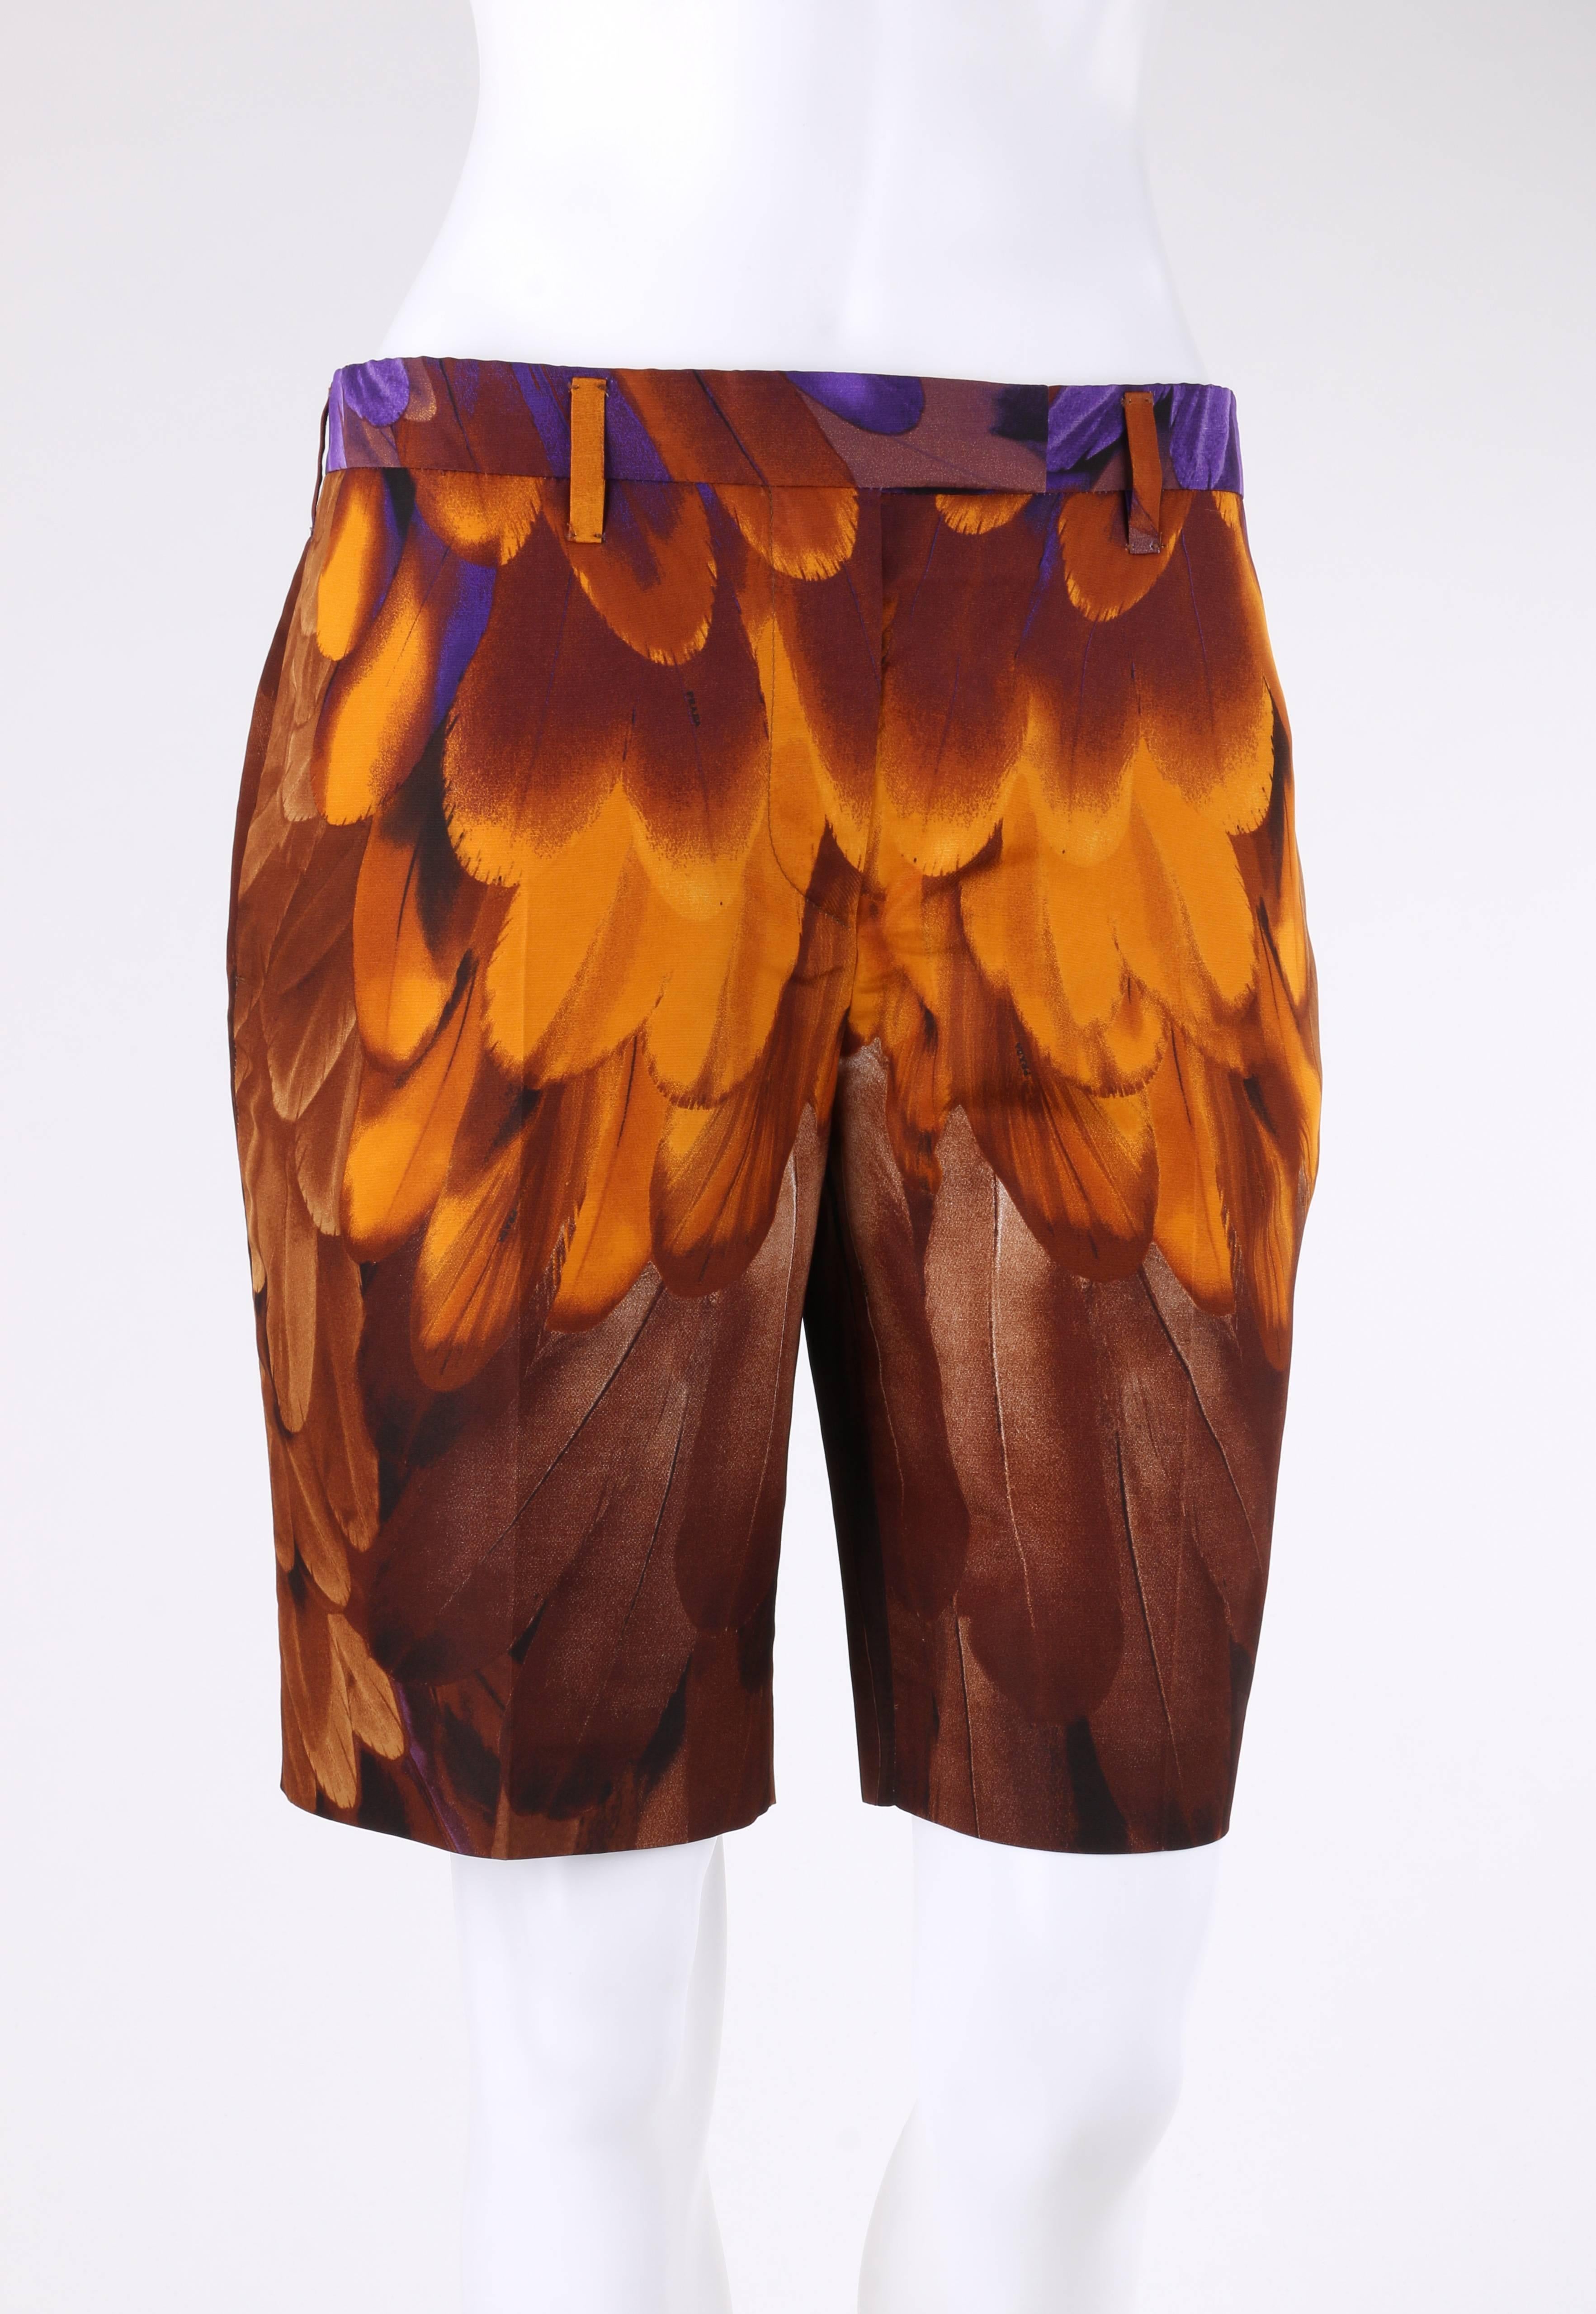 Prada Spring/Summer 2005 brown and gold feather print silk Bermuda shorts designed by Miuccia Prada. Leather feather signature print in shades of brown, gold, and purple. Thin banded waist with six belt loops. Center front zip fly with single